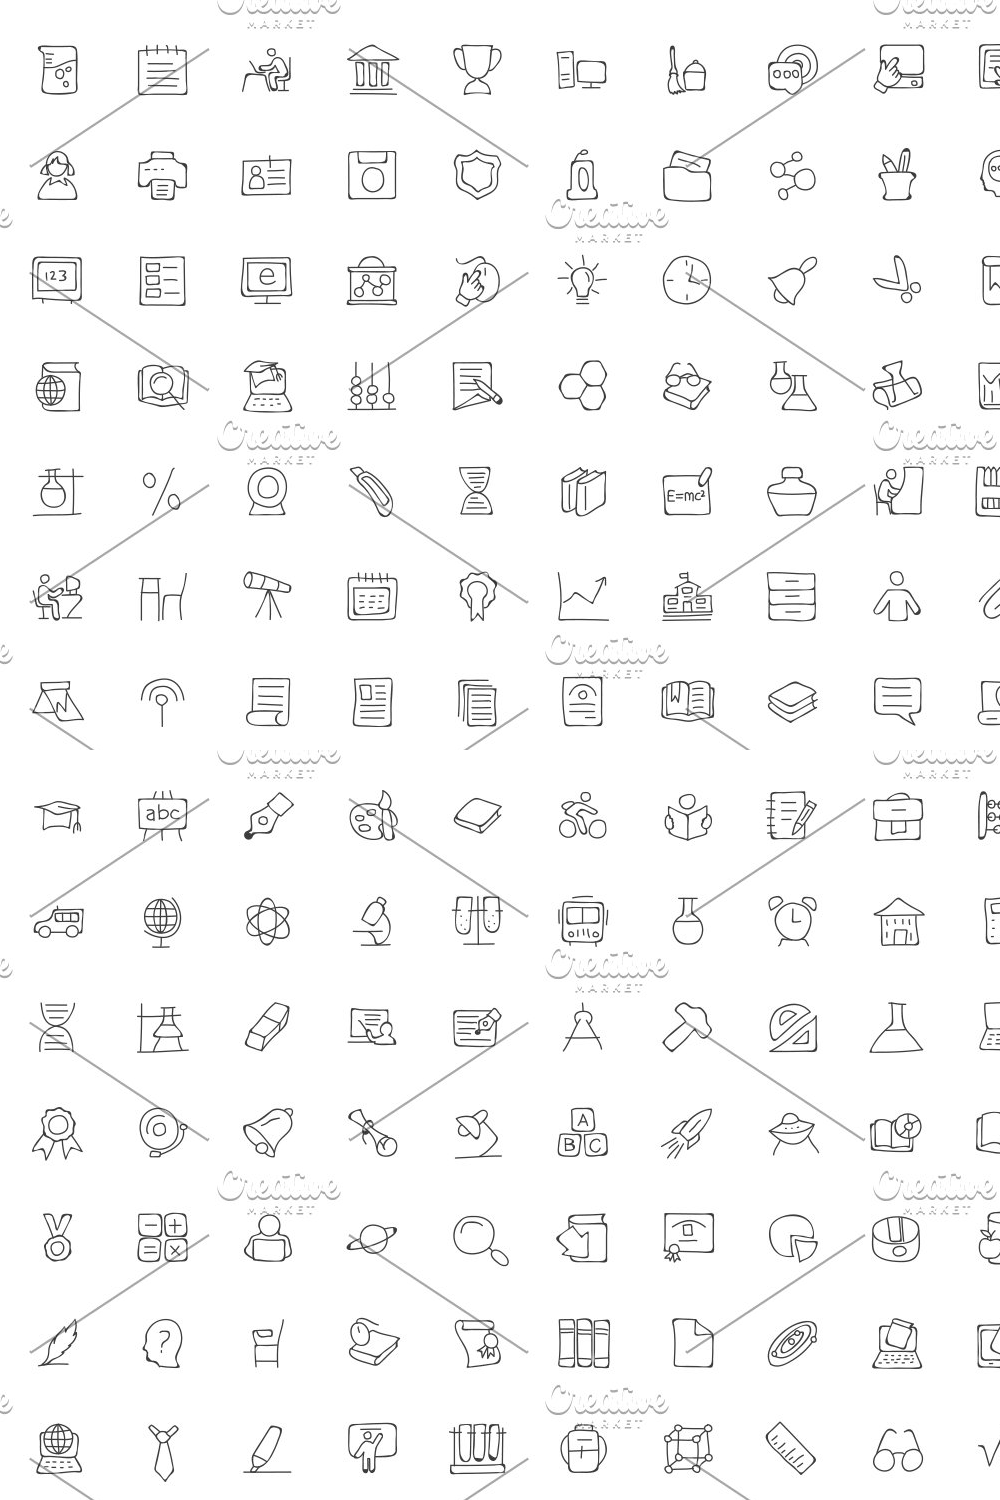 Illustrations 200 education hand drawn doodle icon of pinterest.